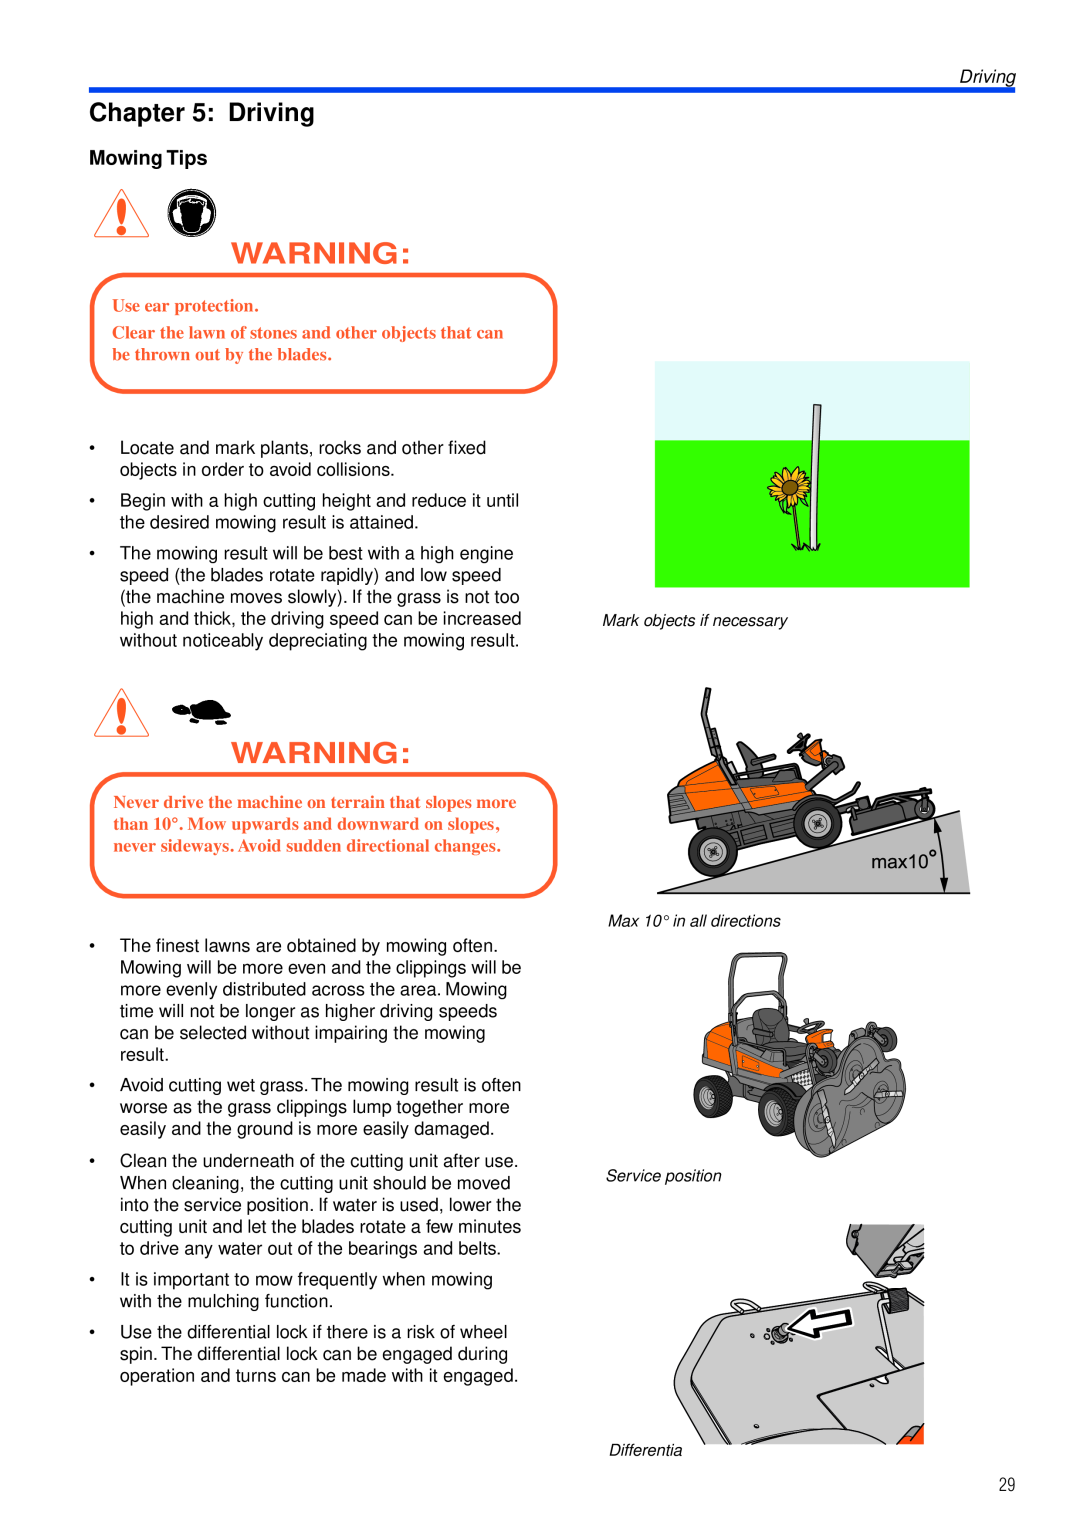 Husqvarna PT26 D manual Driving, Mowing Tips, Use ear protection 